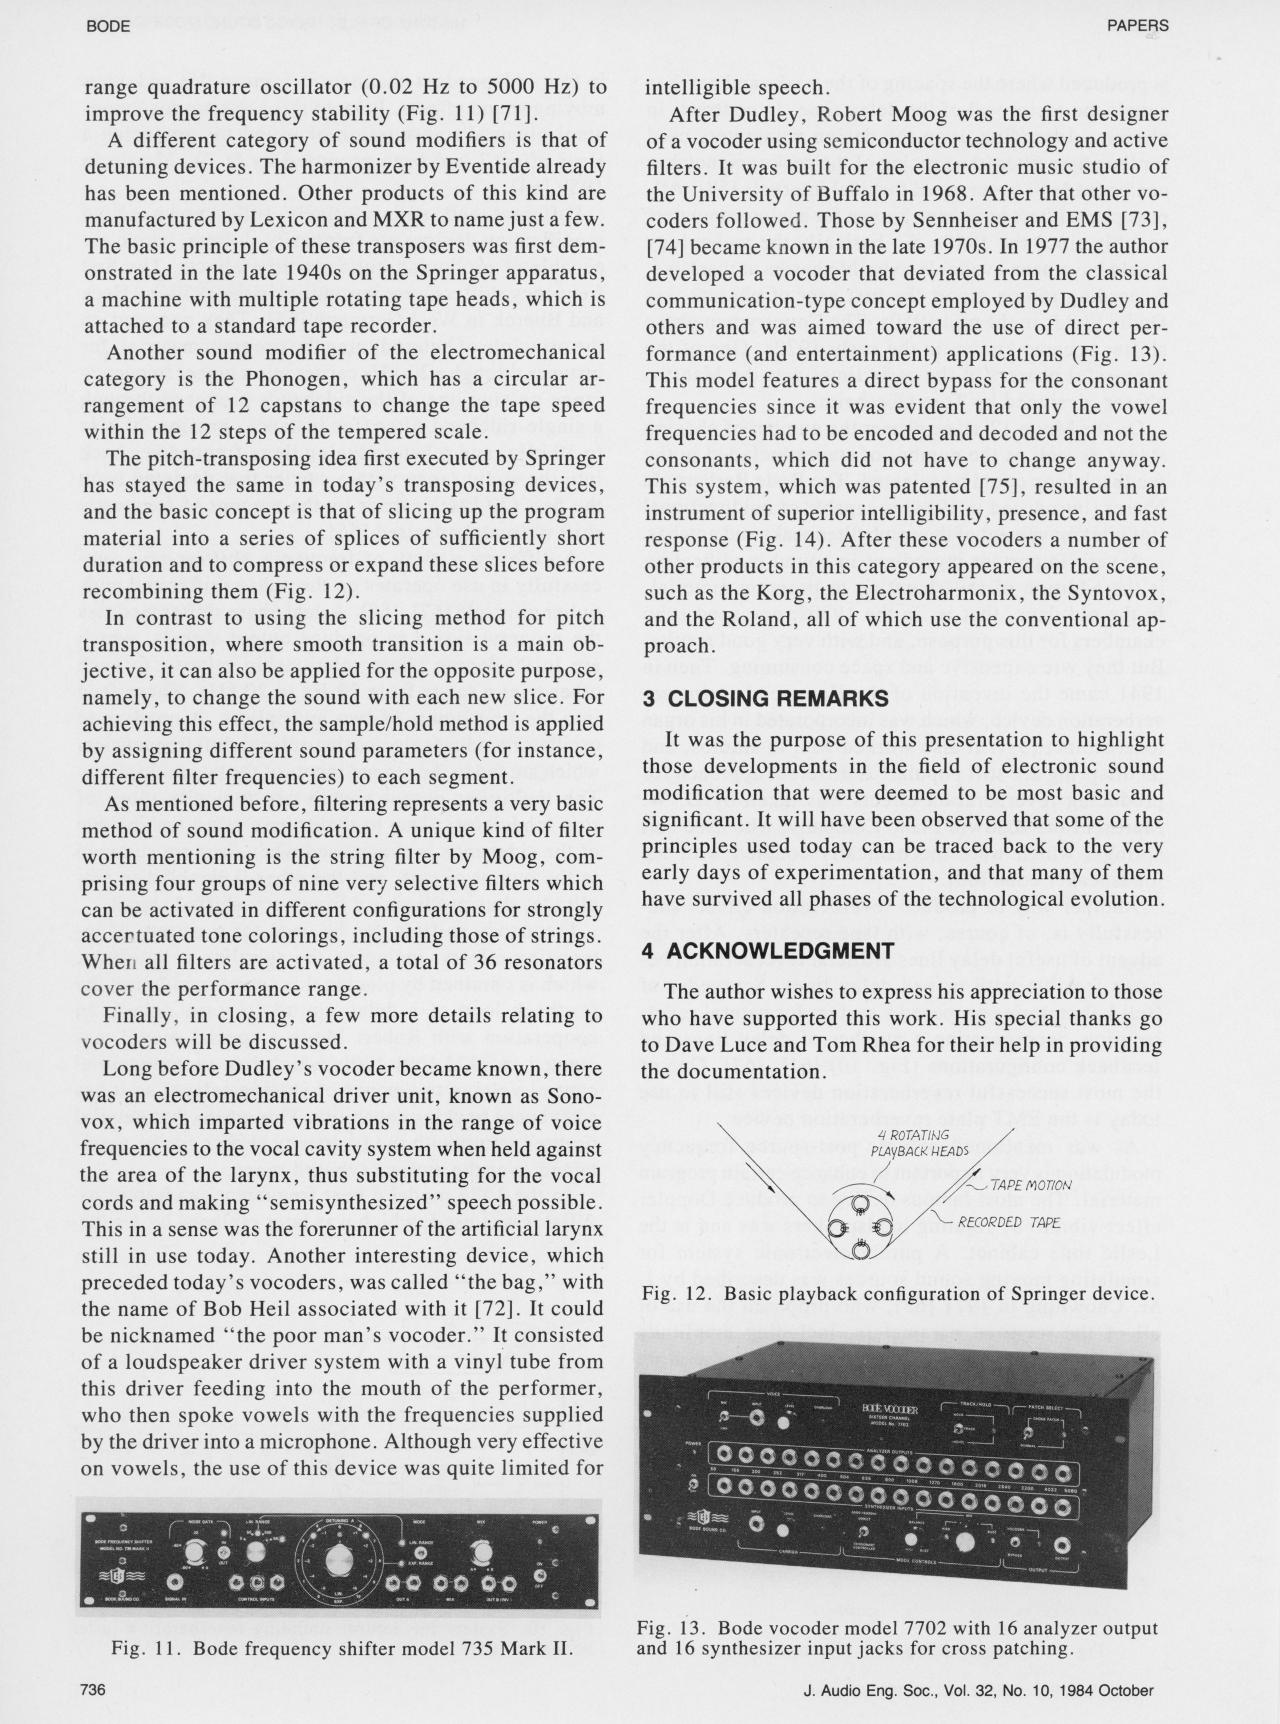 Harald Bode: »History of Electronic Sound Modification« (1984)